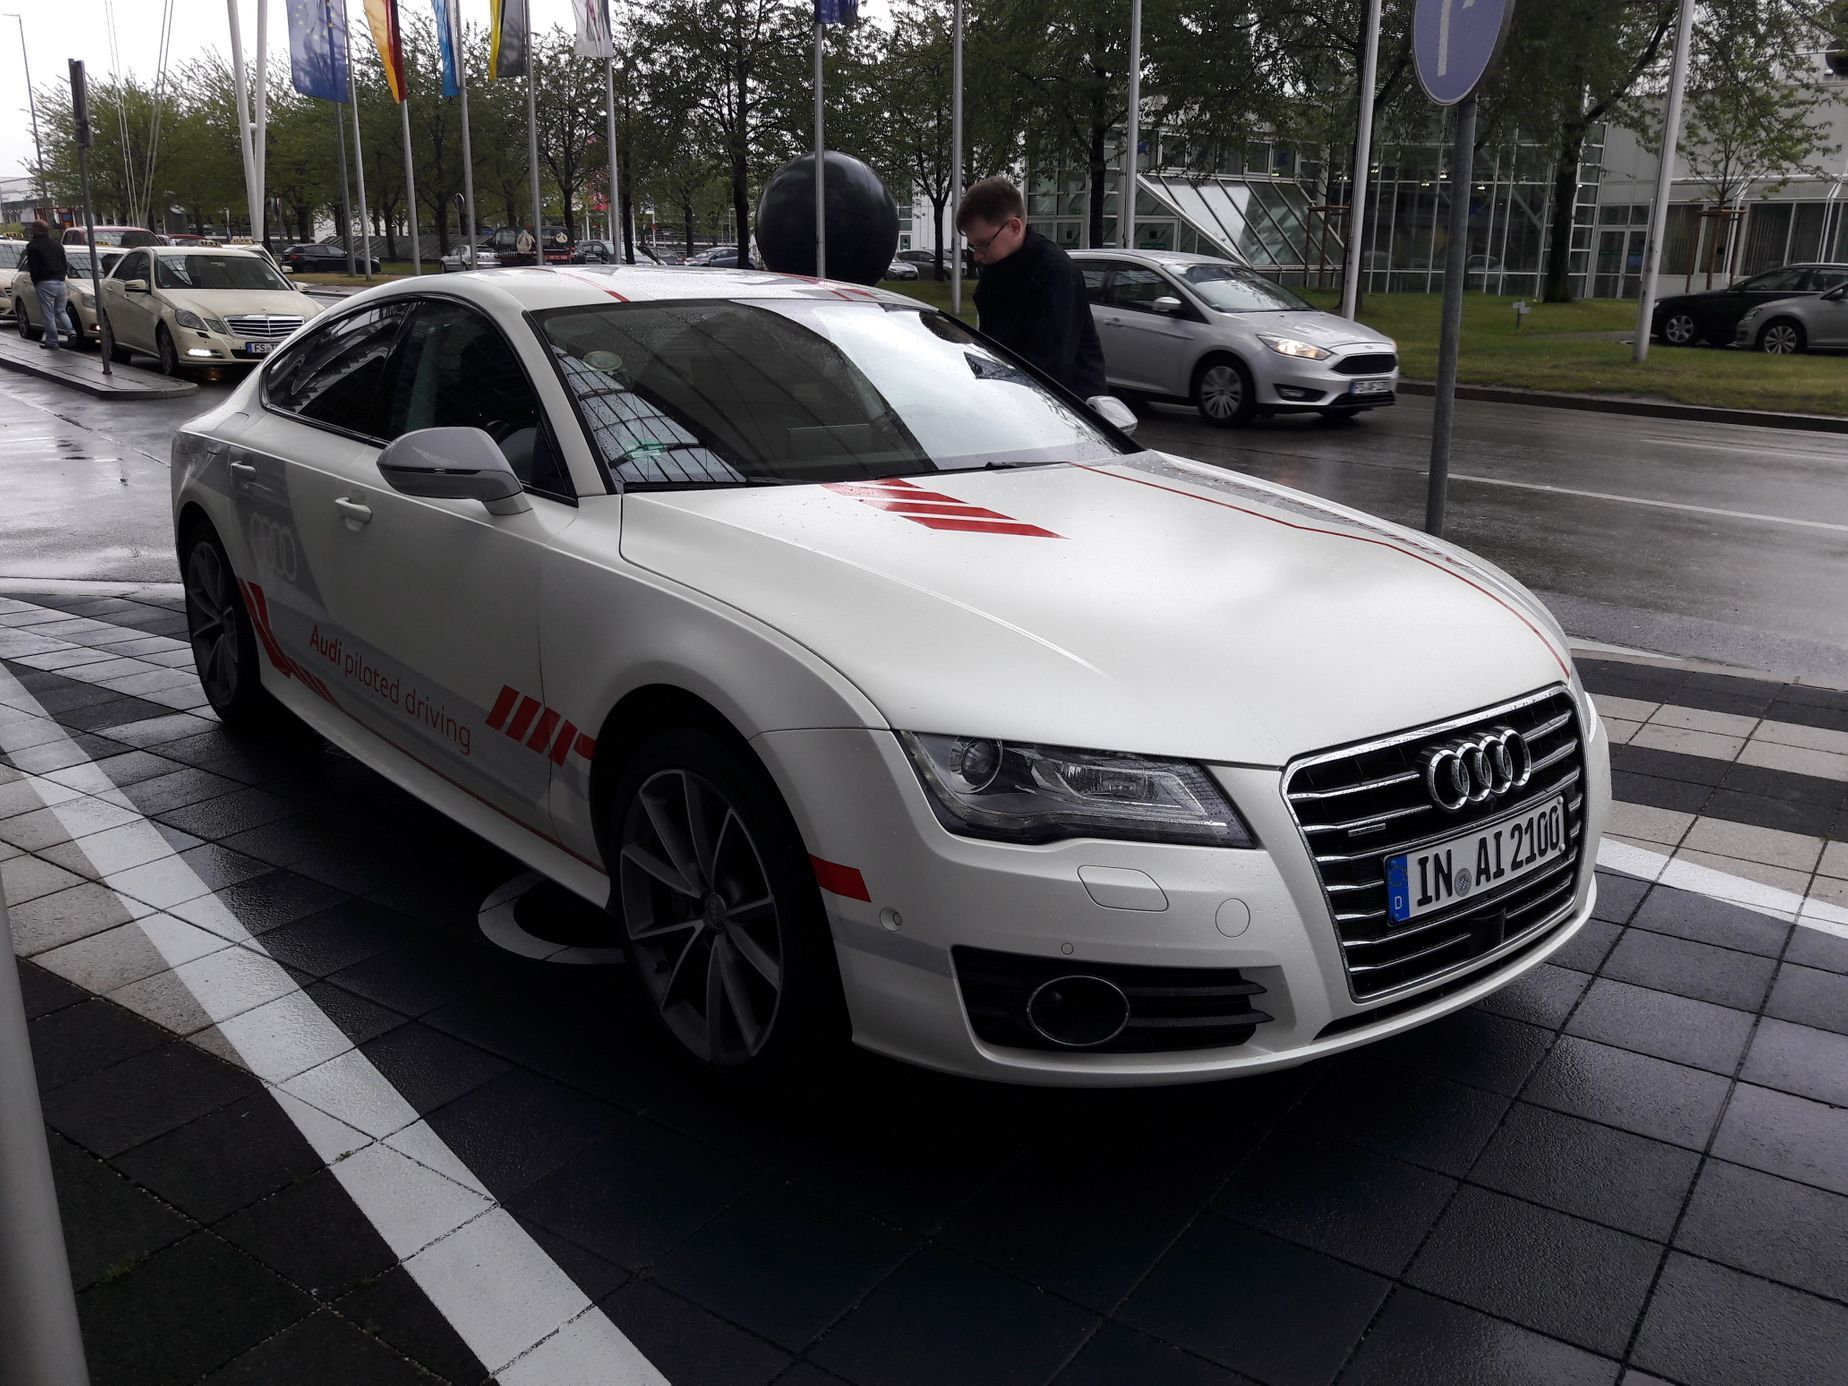 Audi A7 piloted driving